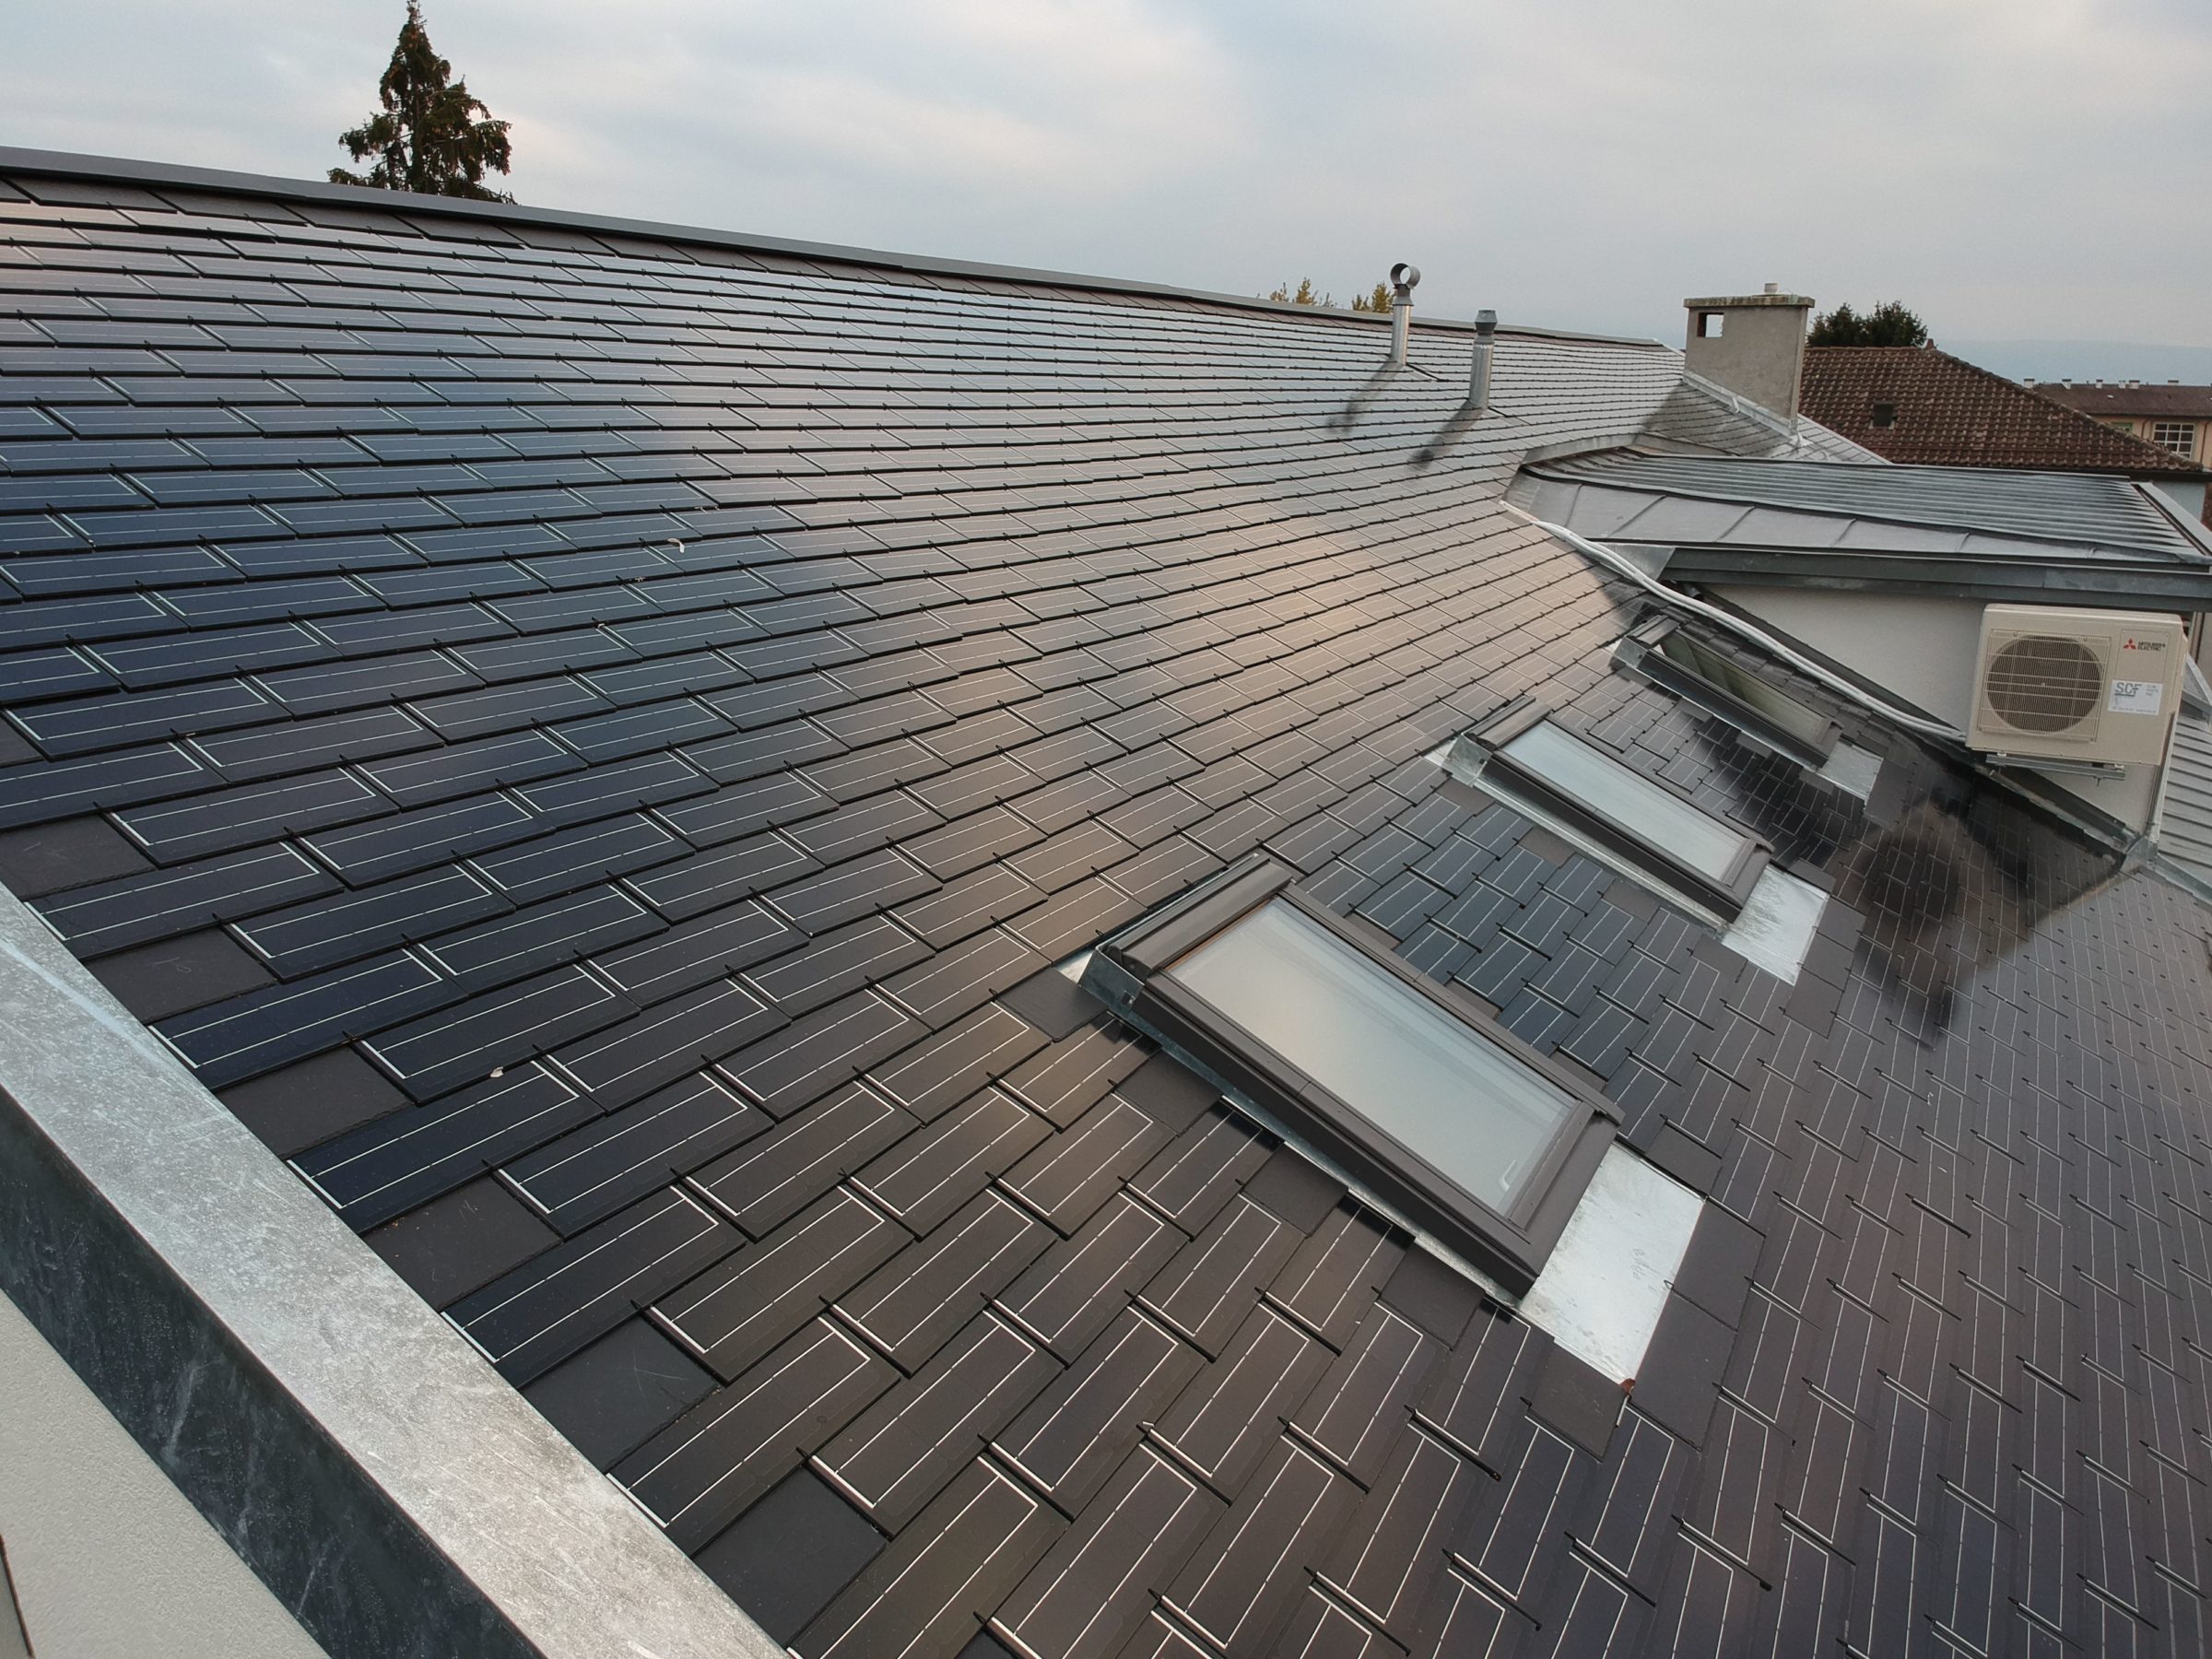 Solar tiles for new and historic buildings pv magazine International